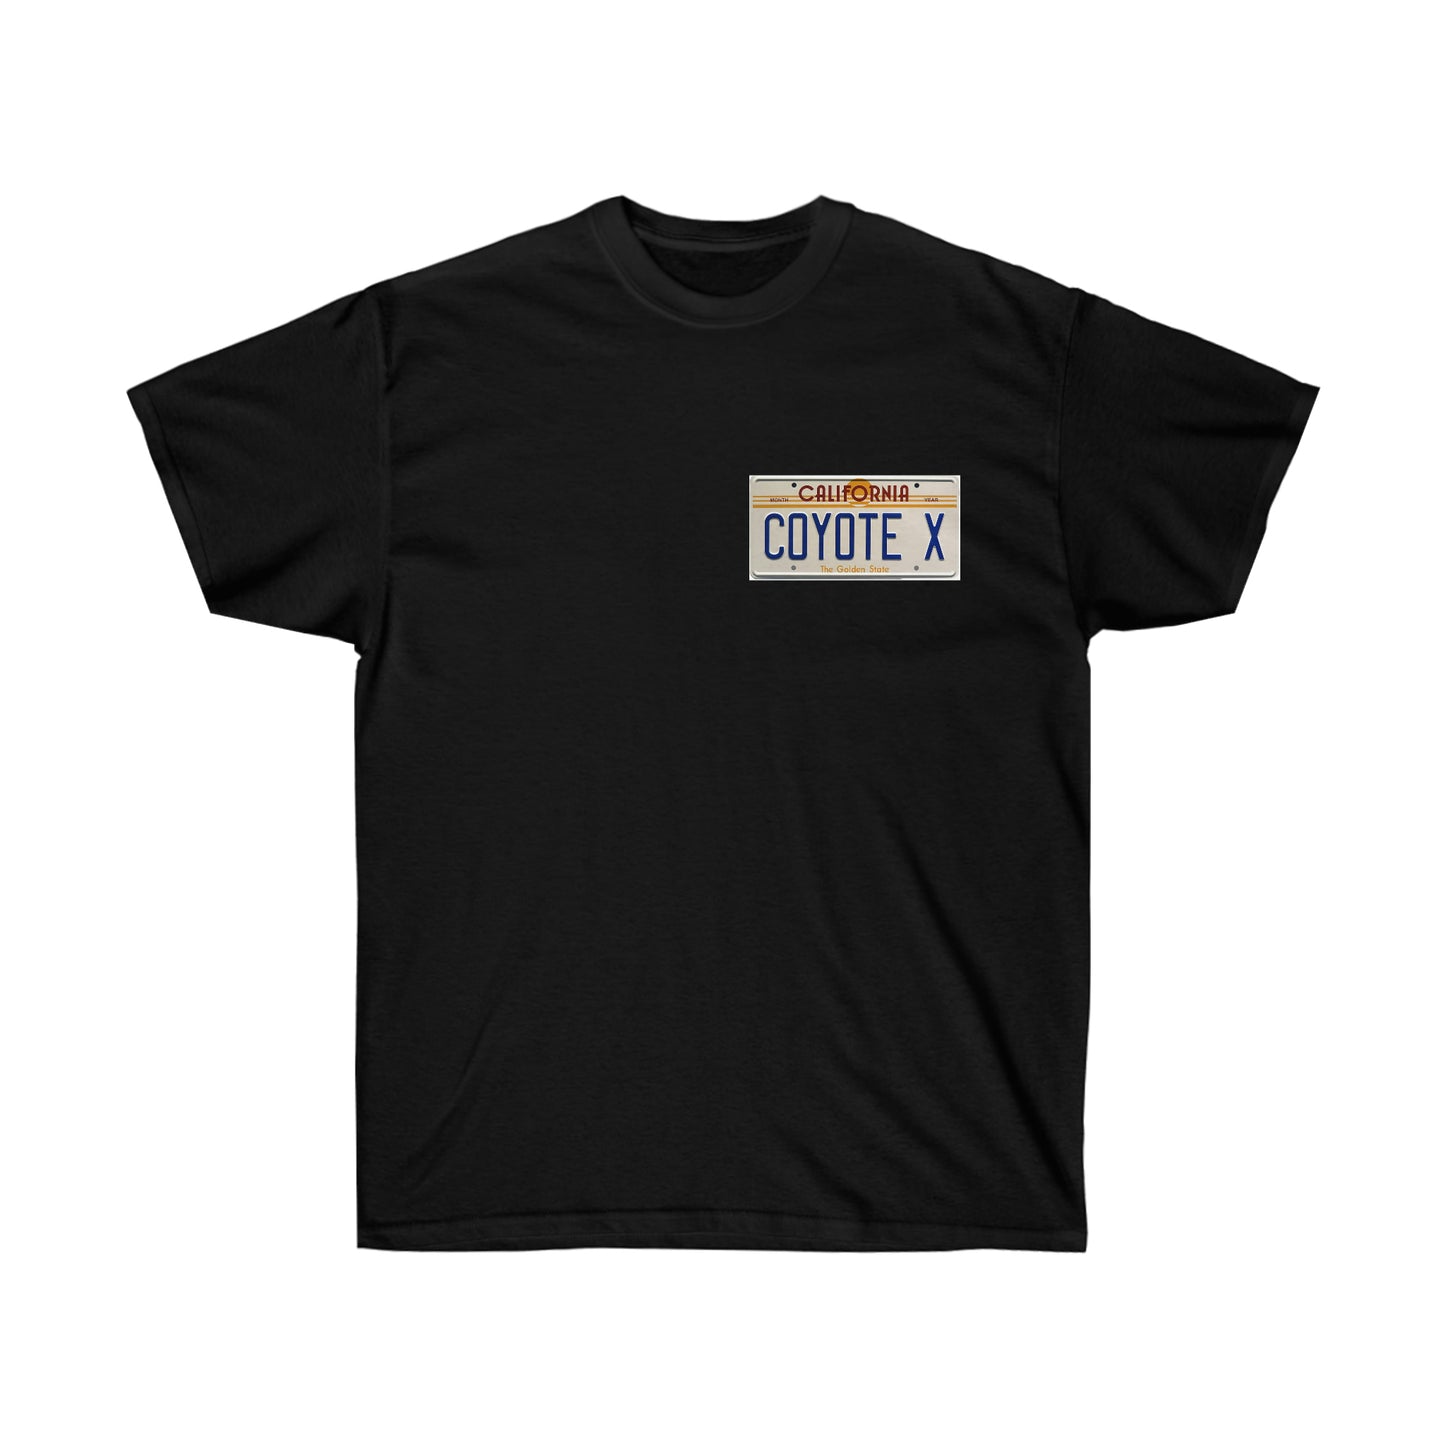 Coyote X Ultra Cotton Tee- Multi Color Options